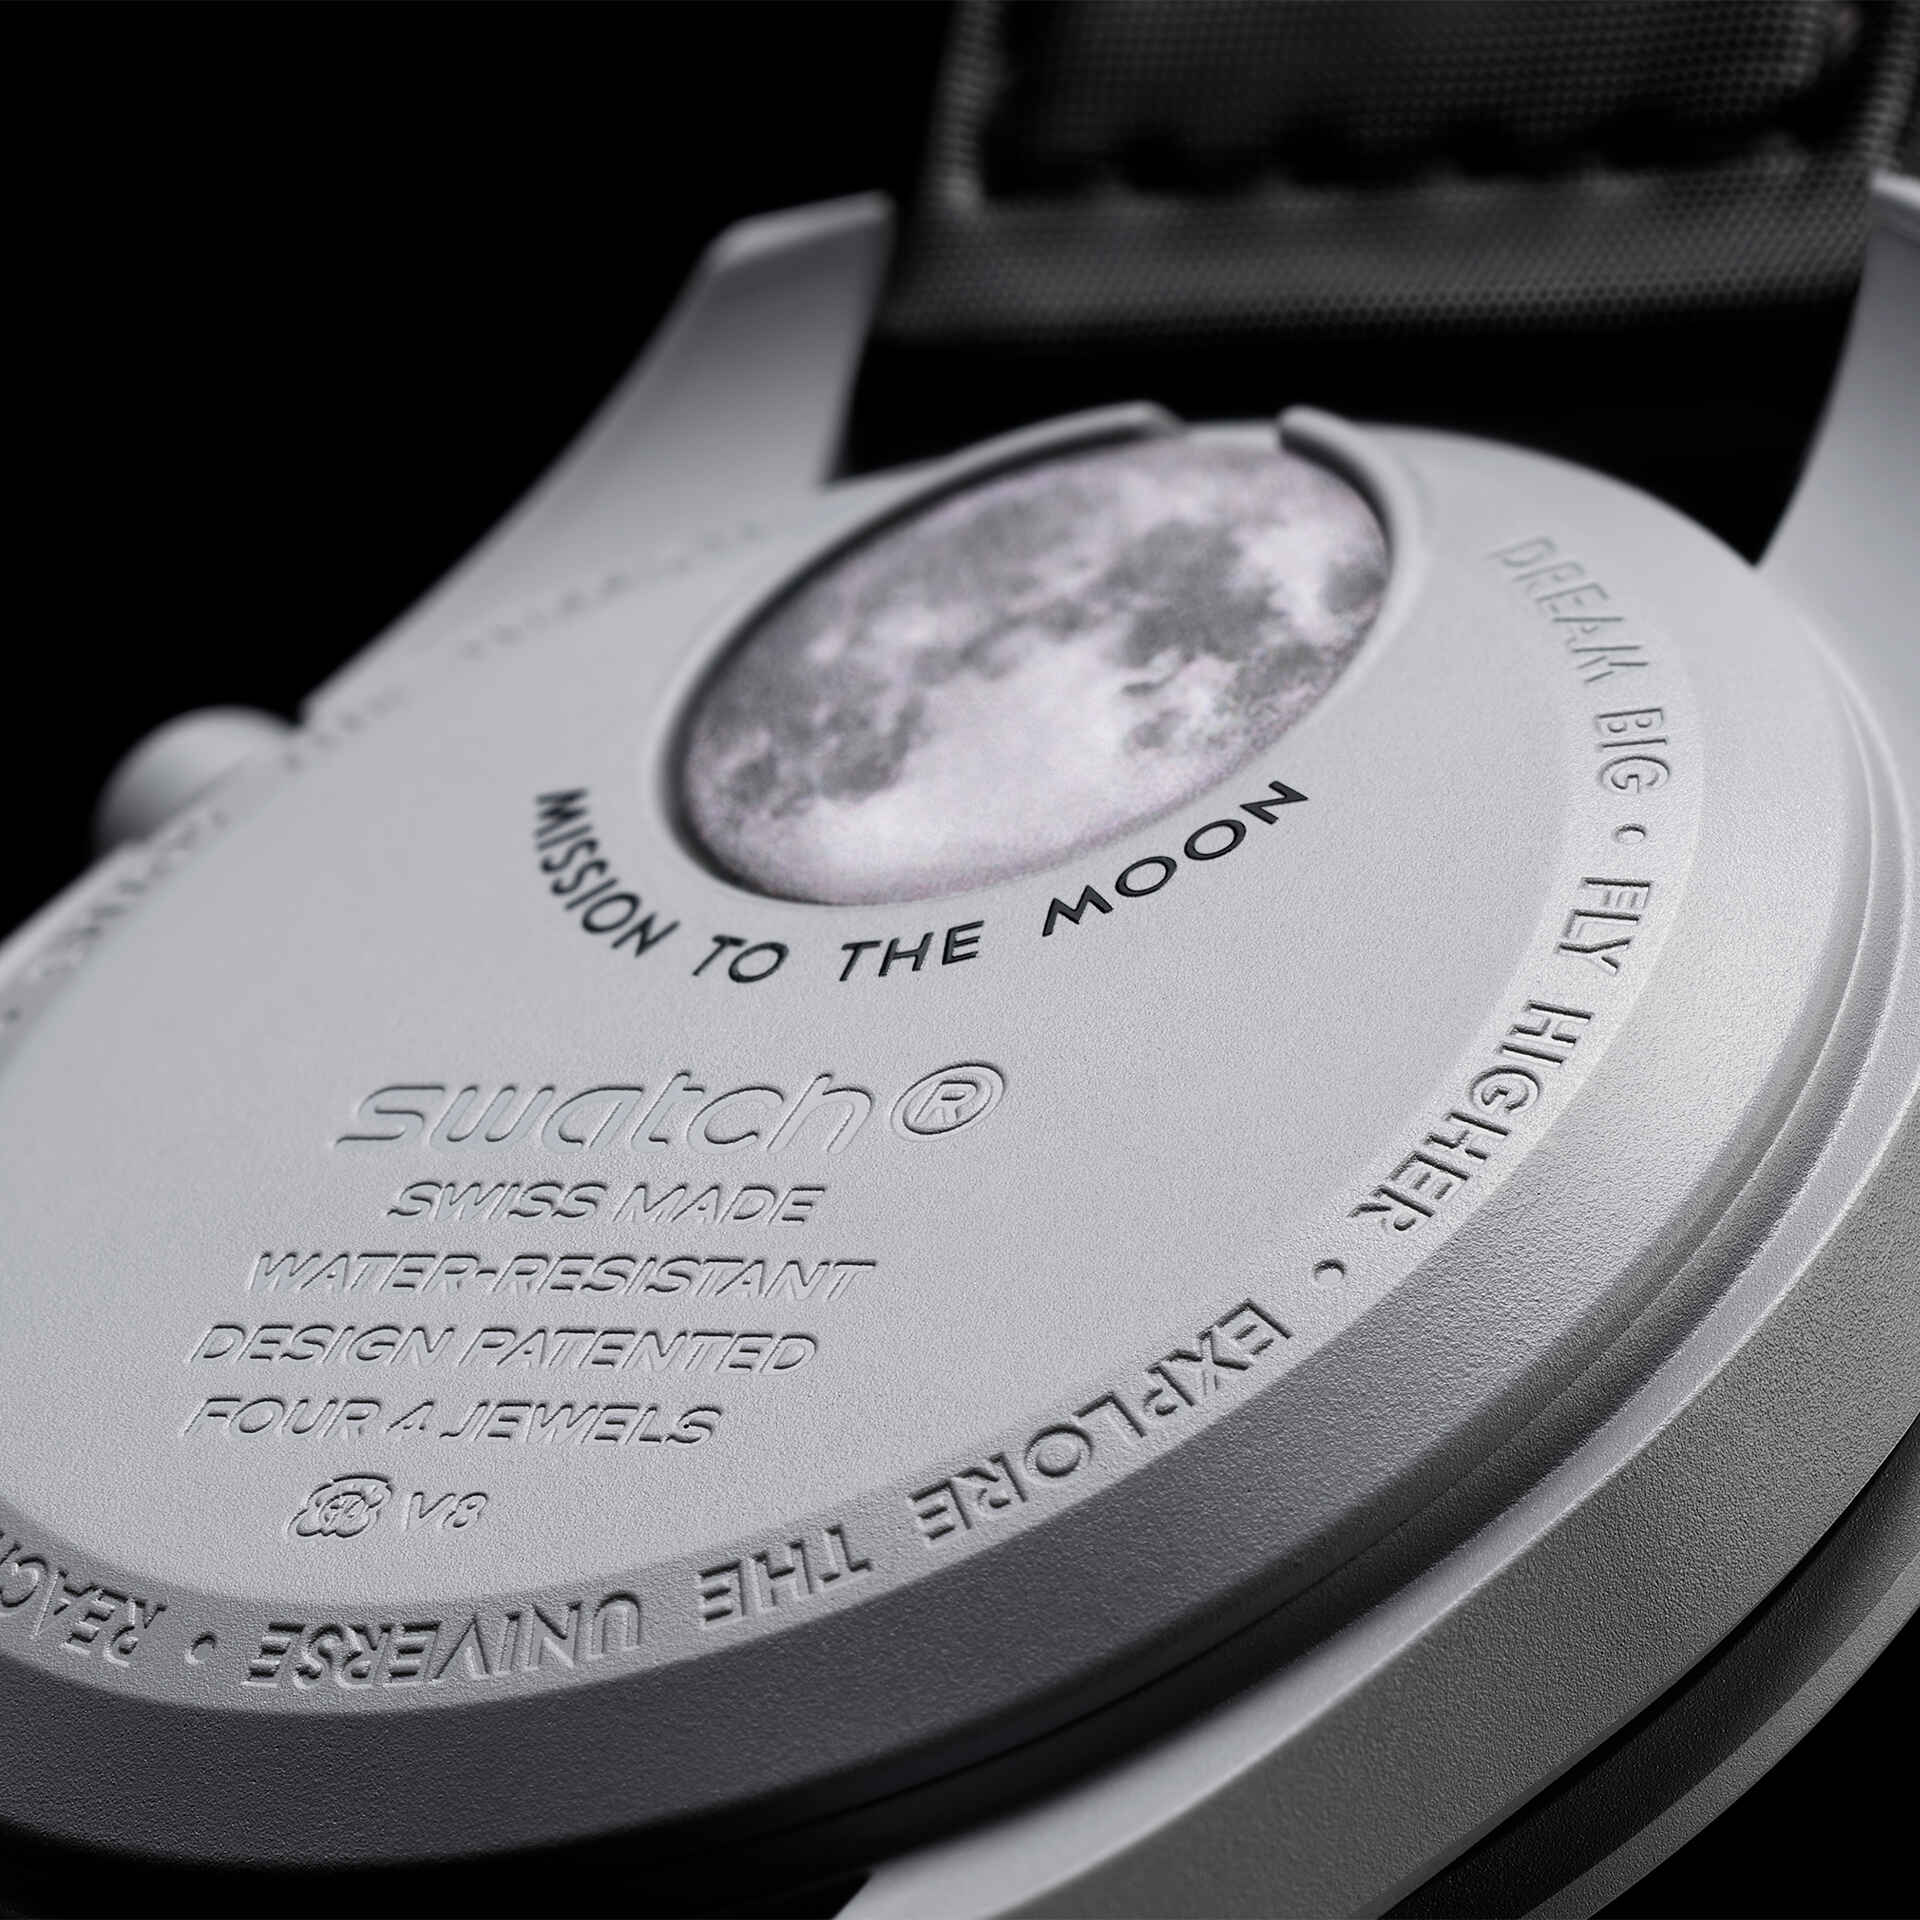 SO33M100 - MISSION TO THE MOON - Swatch® Official Store